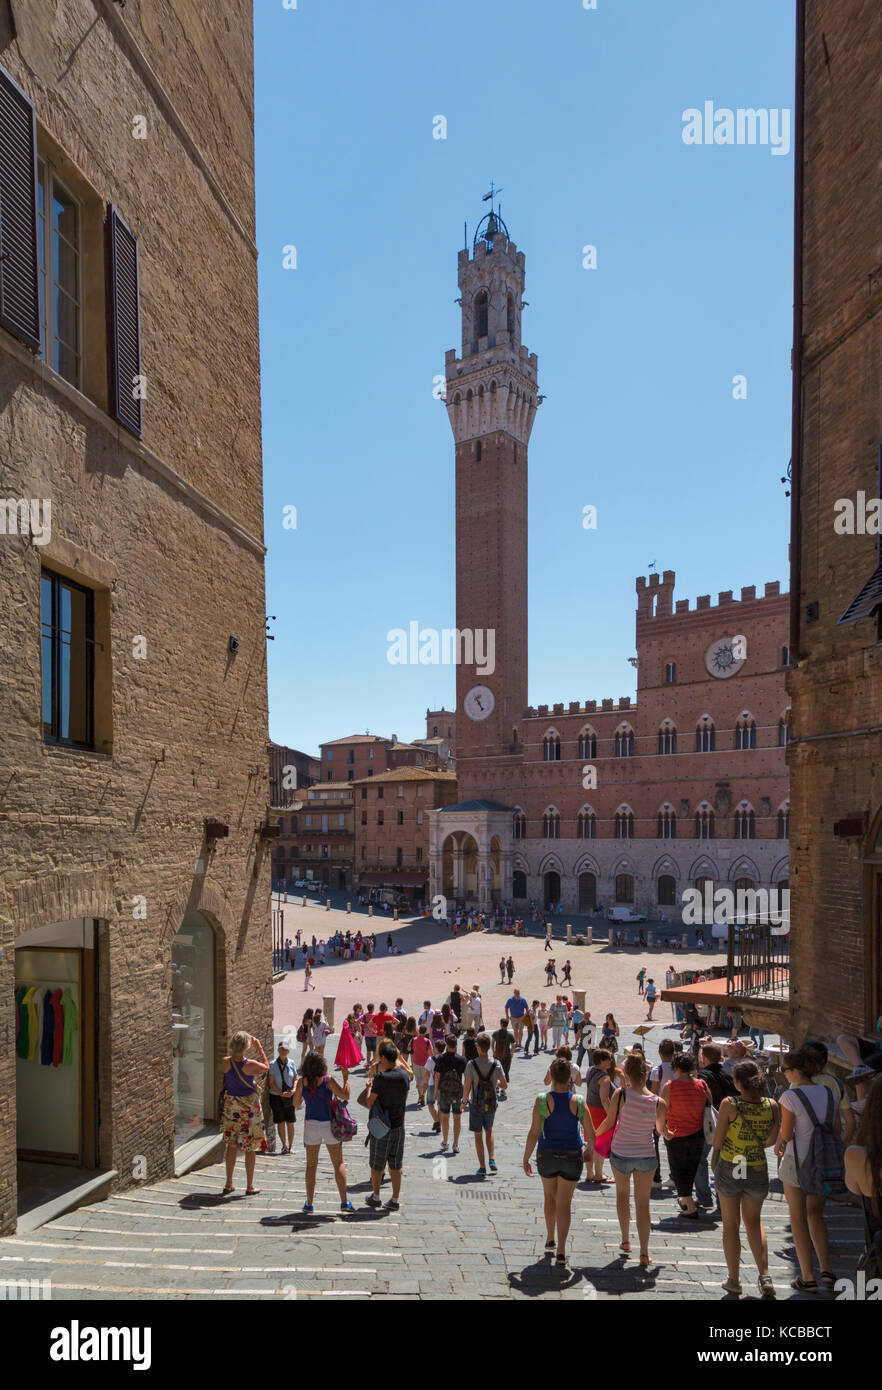 Siena, Siena Province, Tuscany, Italy.  The Palazzo Pubblico with the Torre de Mangia seen across the Piazza del Campo.  The Historic Centre of Siena  Stock Photo